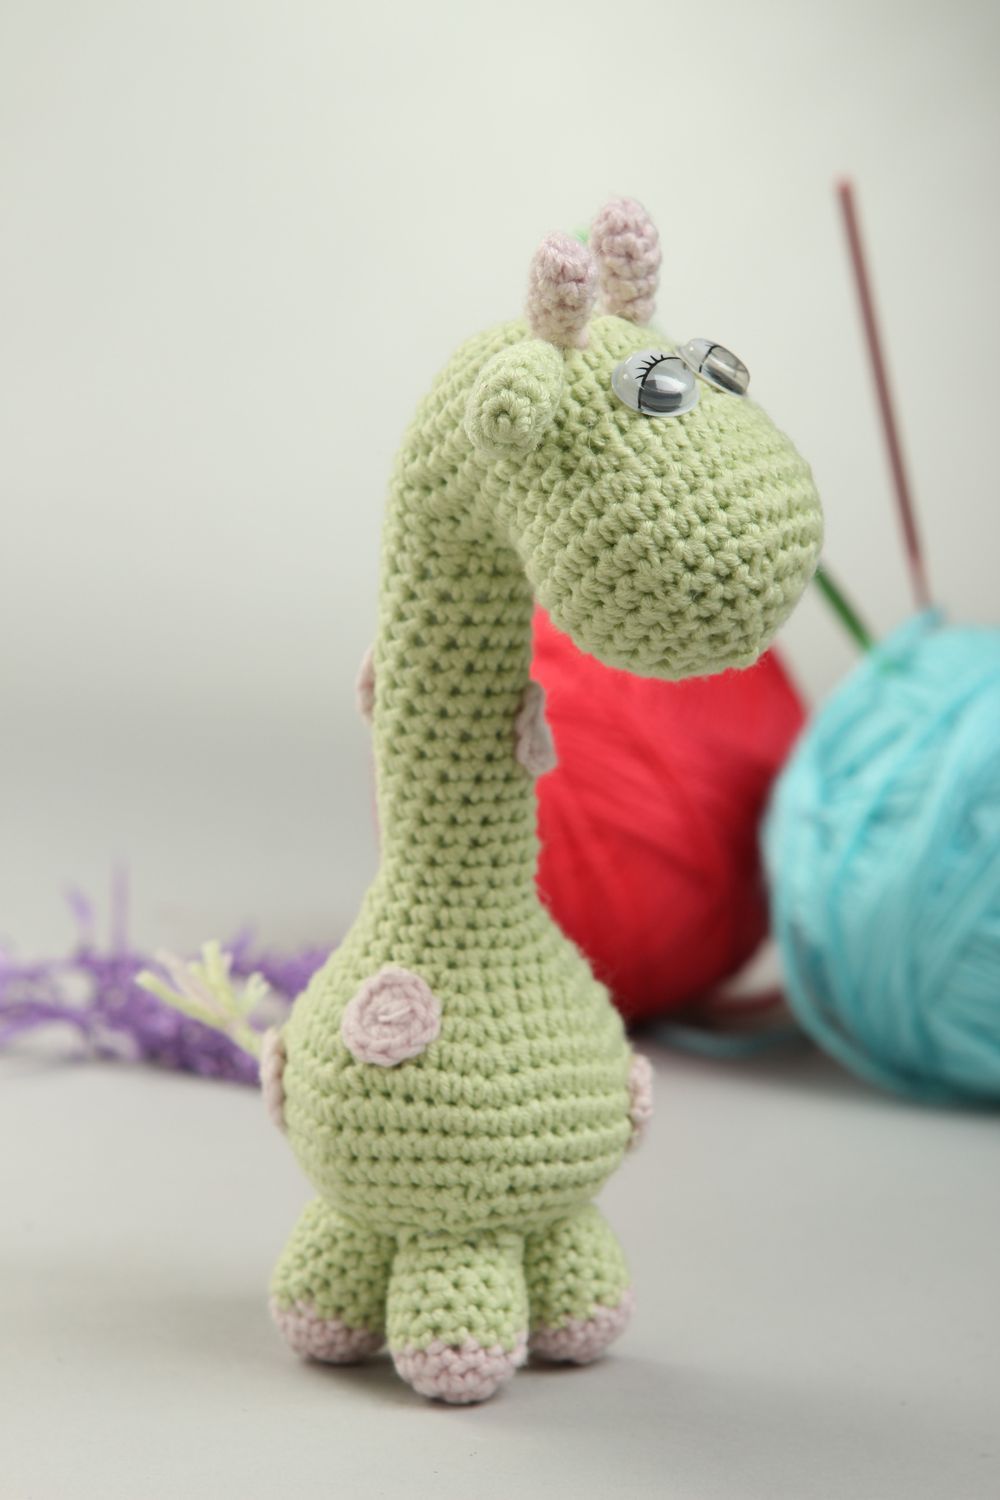 Handmade soft toy giraffe baby toy decorative crocheted toy cute toy for kids photo 1